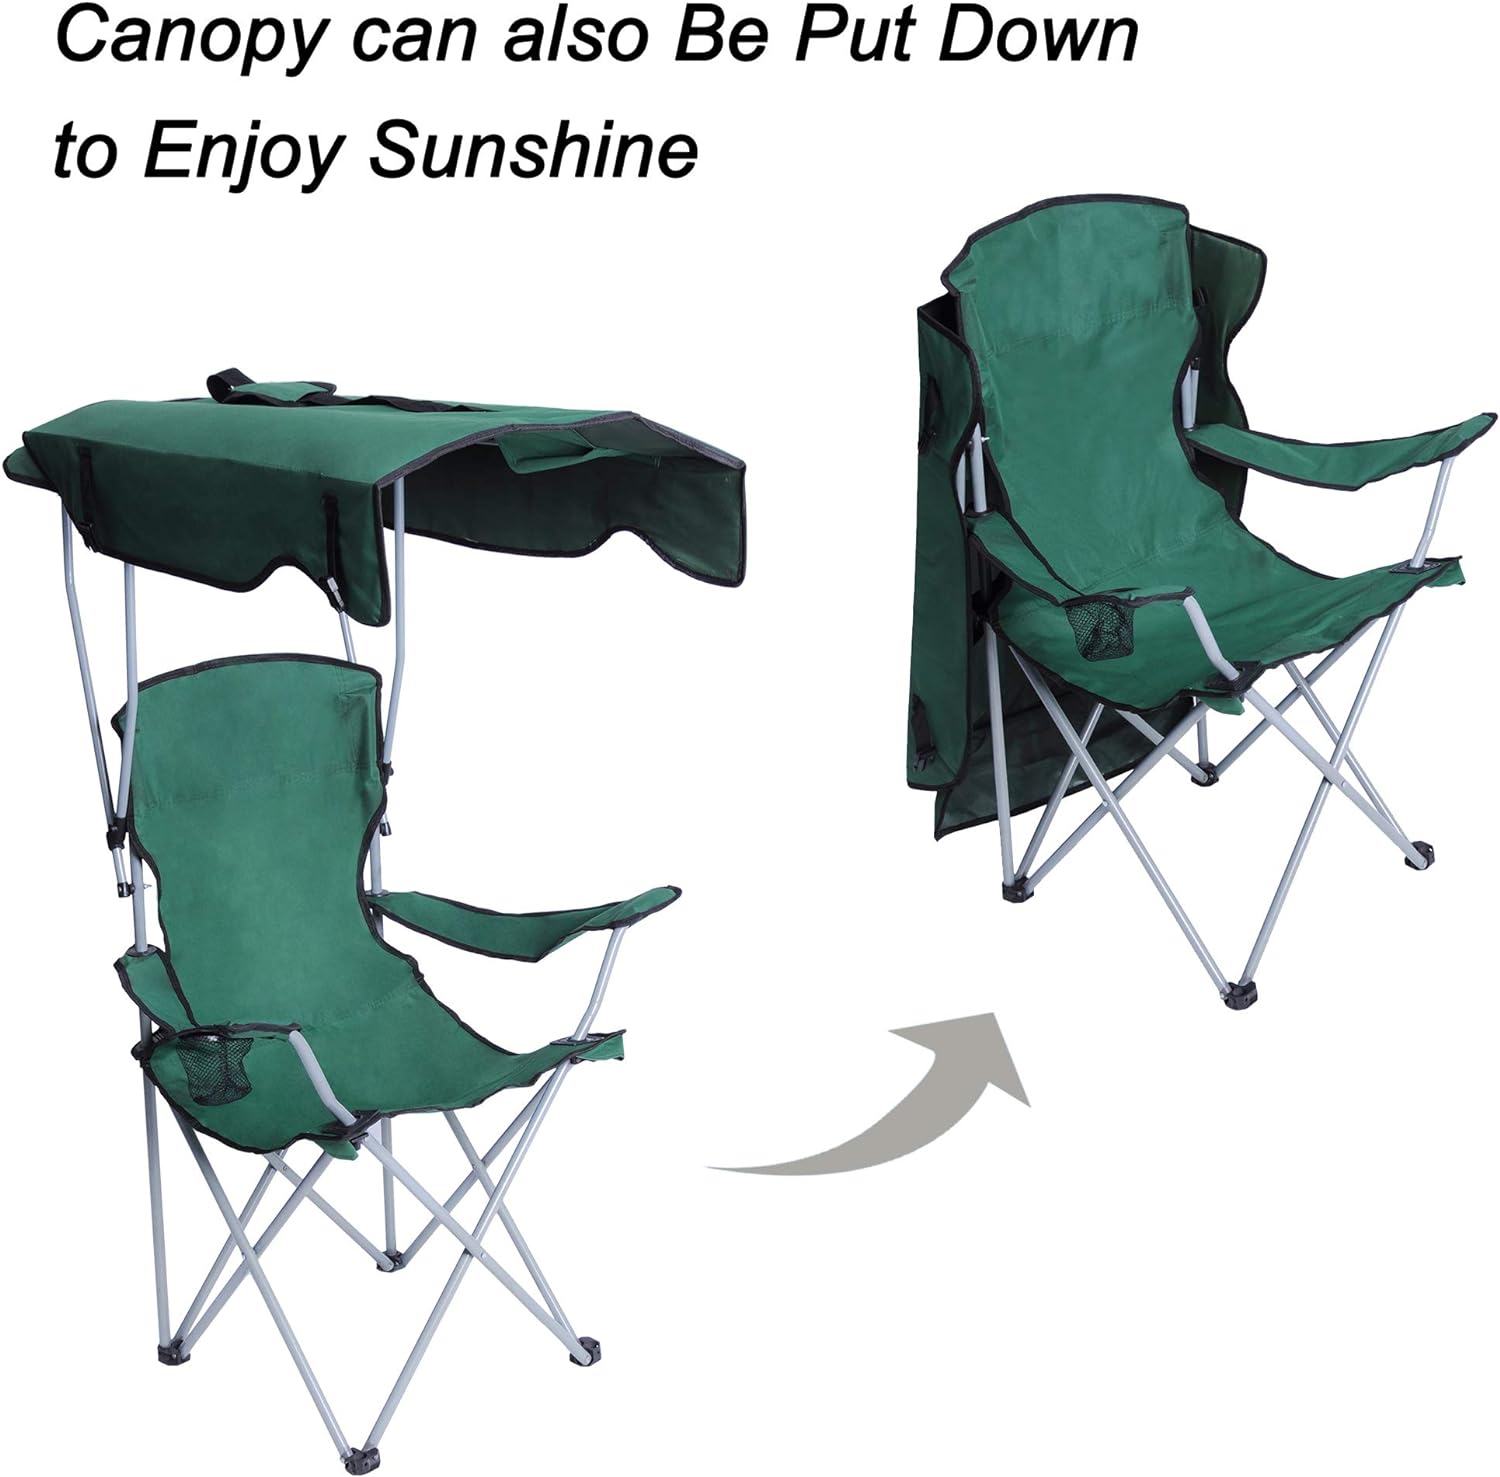 Portable Camping Chairs with Shade Canopy Cup Holder Carry Bag Folding Beach Chairs, Green